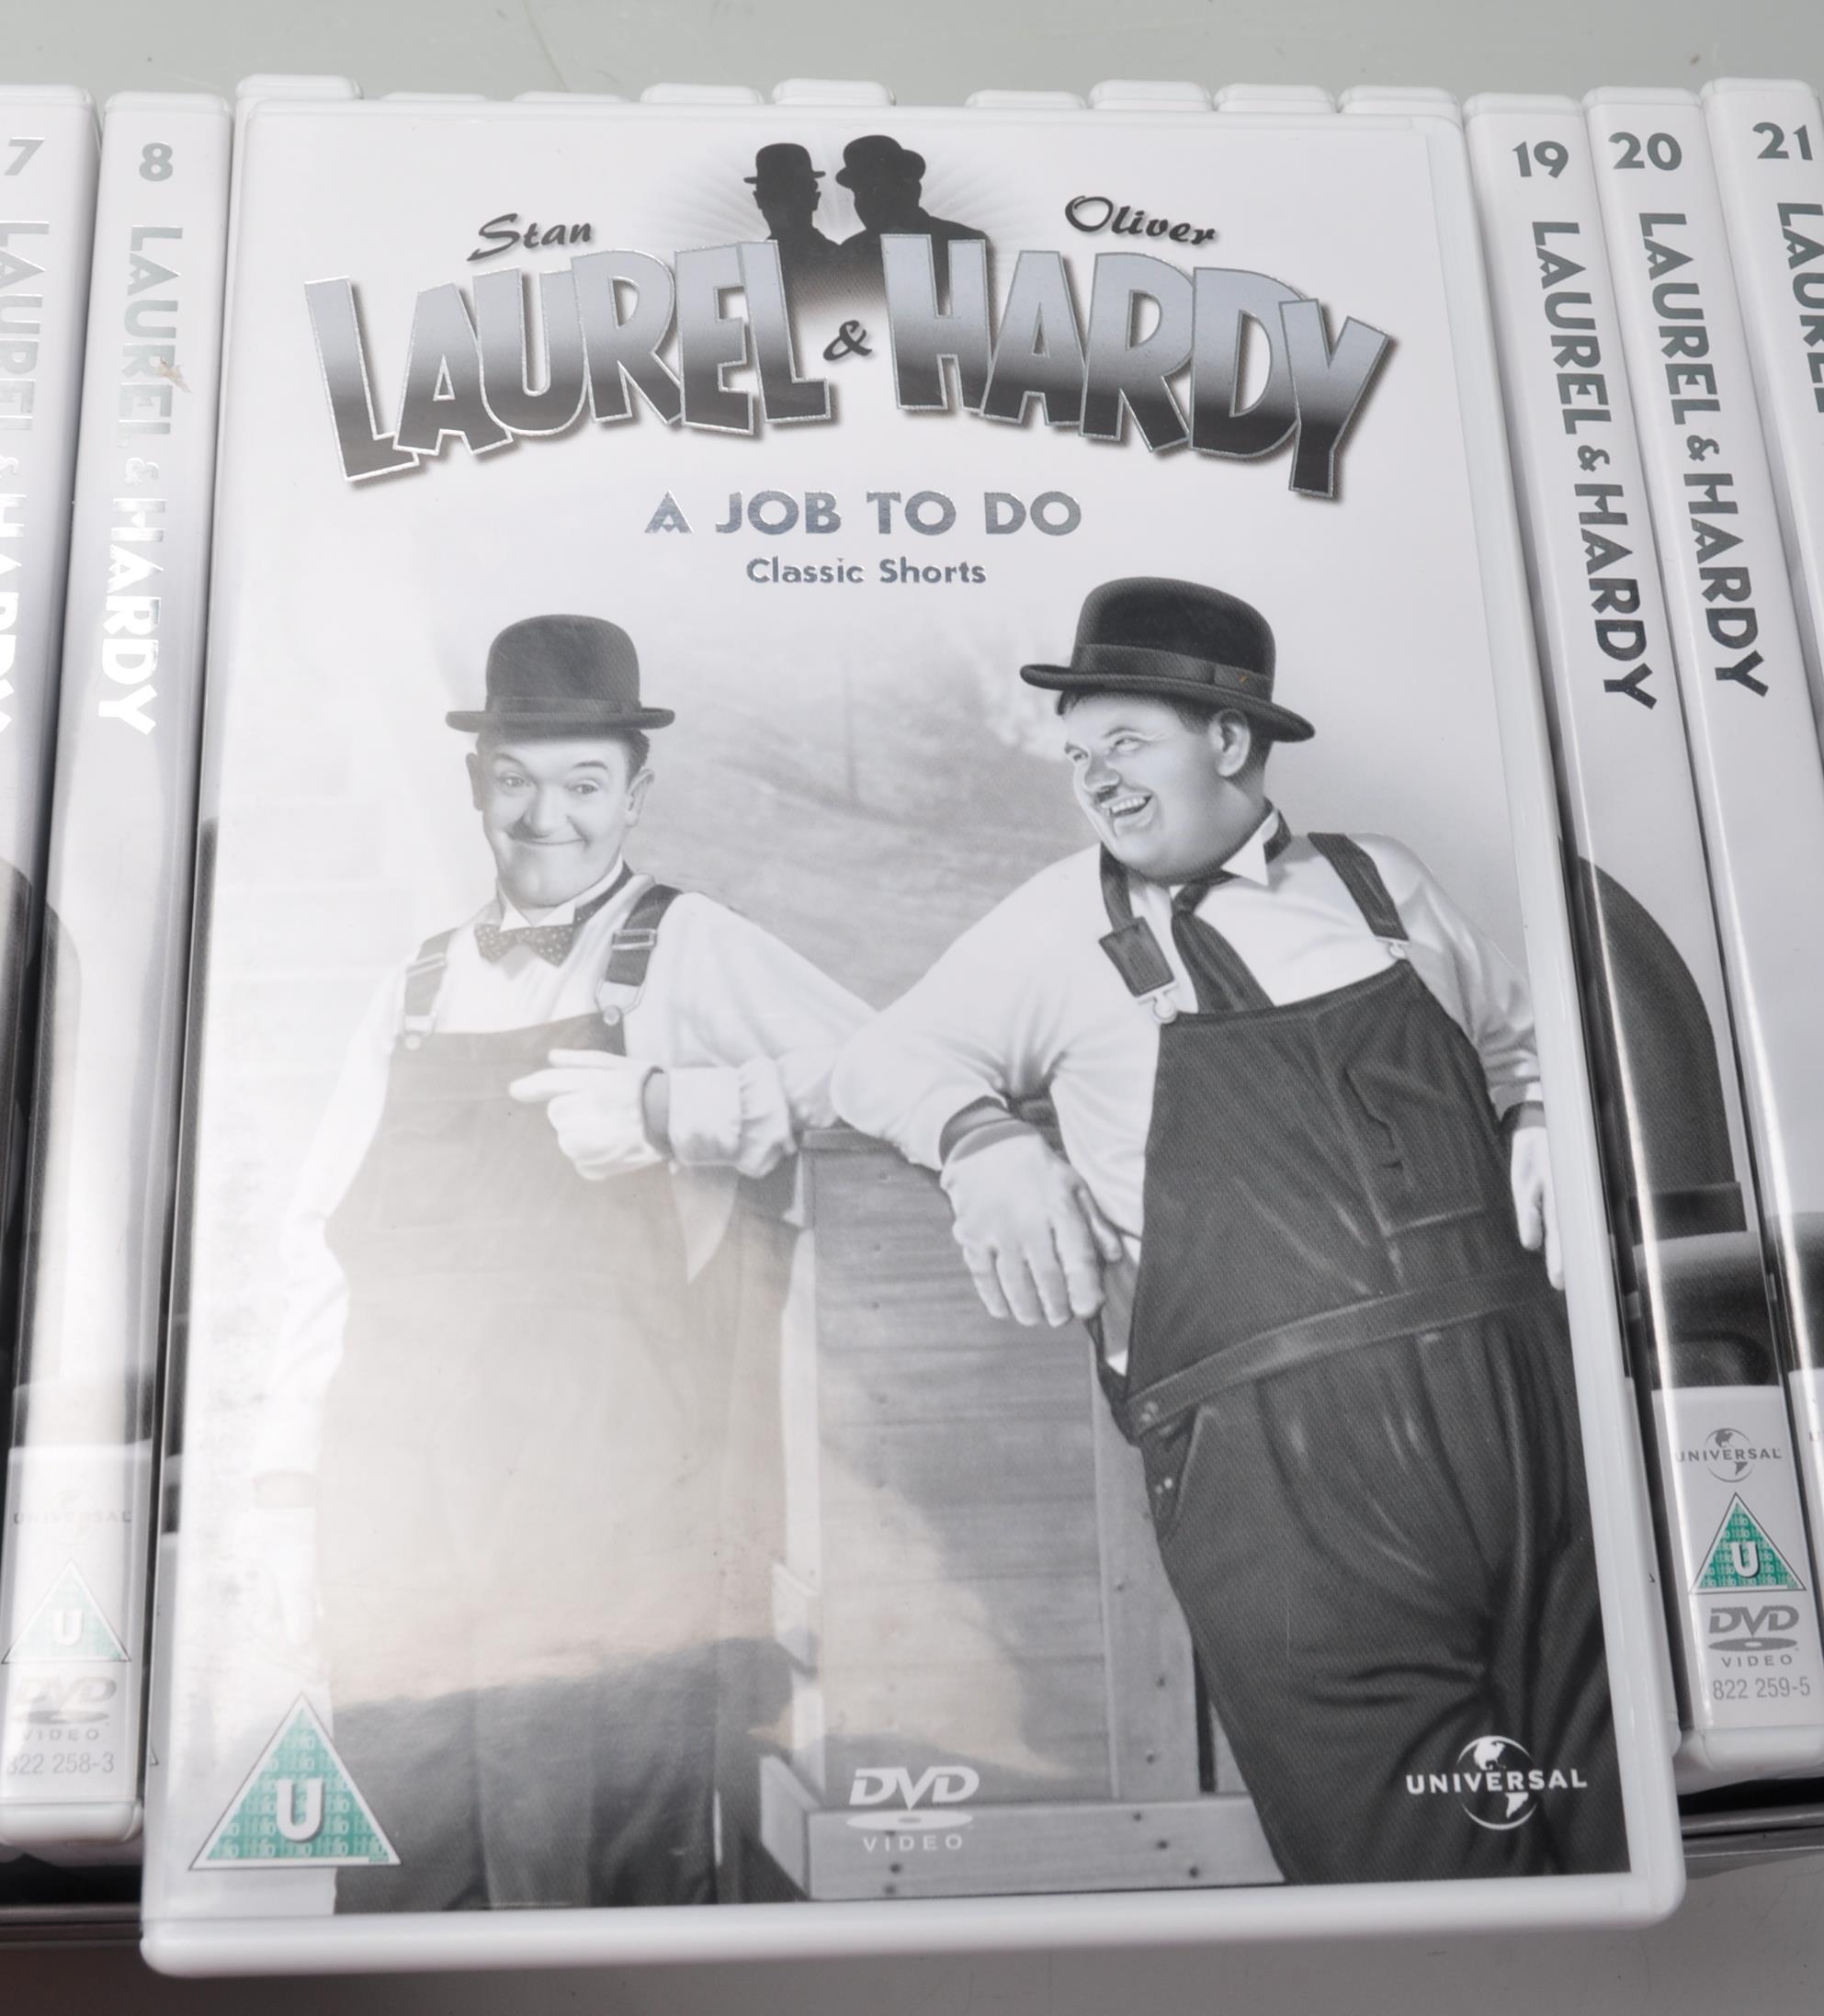 LAUREL AND HARDY THE COLLECTION - 21 DVD BOX SET - Image 5 of 7